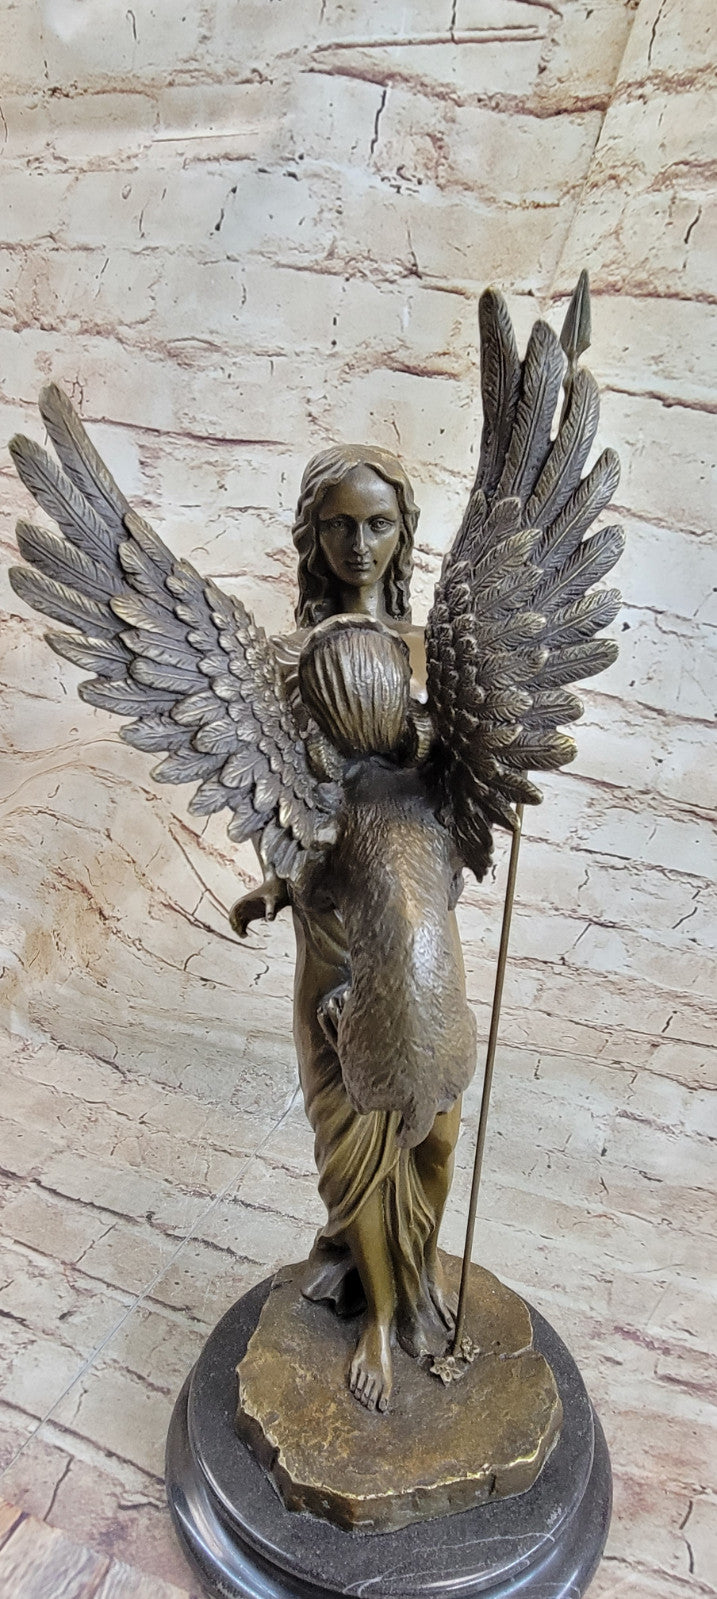 1920s Bronze Large Winged Griffin Art-Deco Home Decor Table Top- Magnificent!